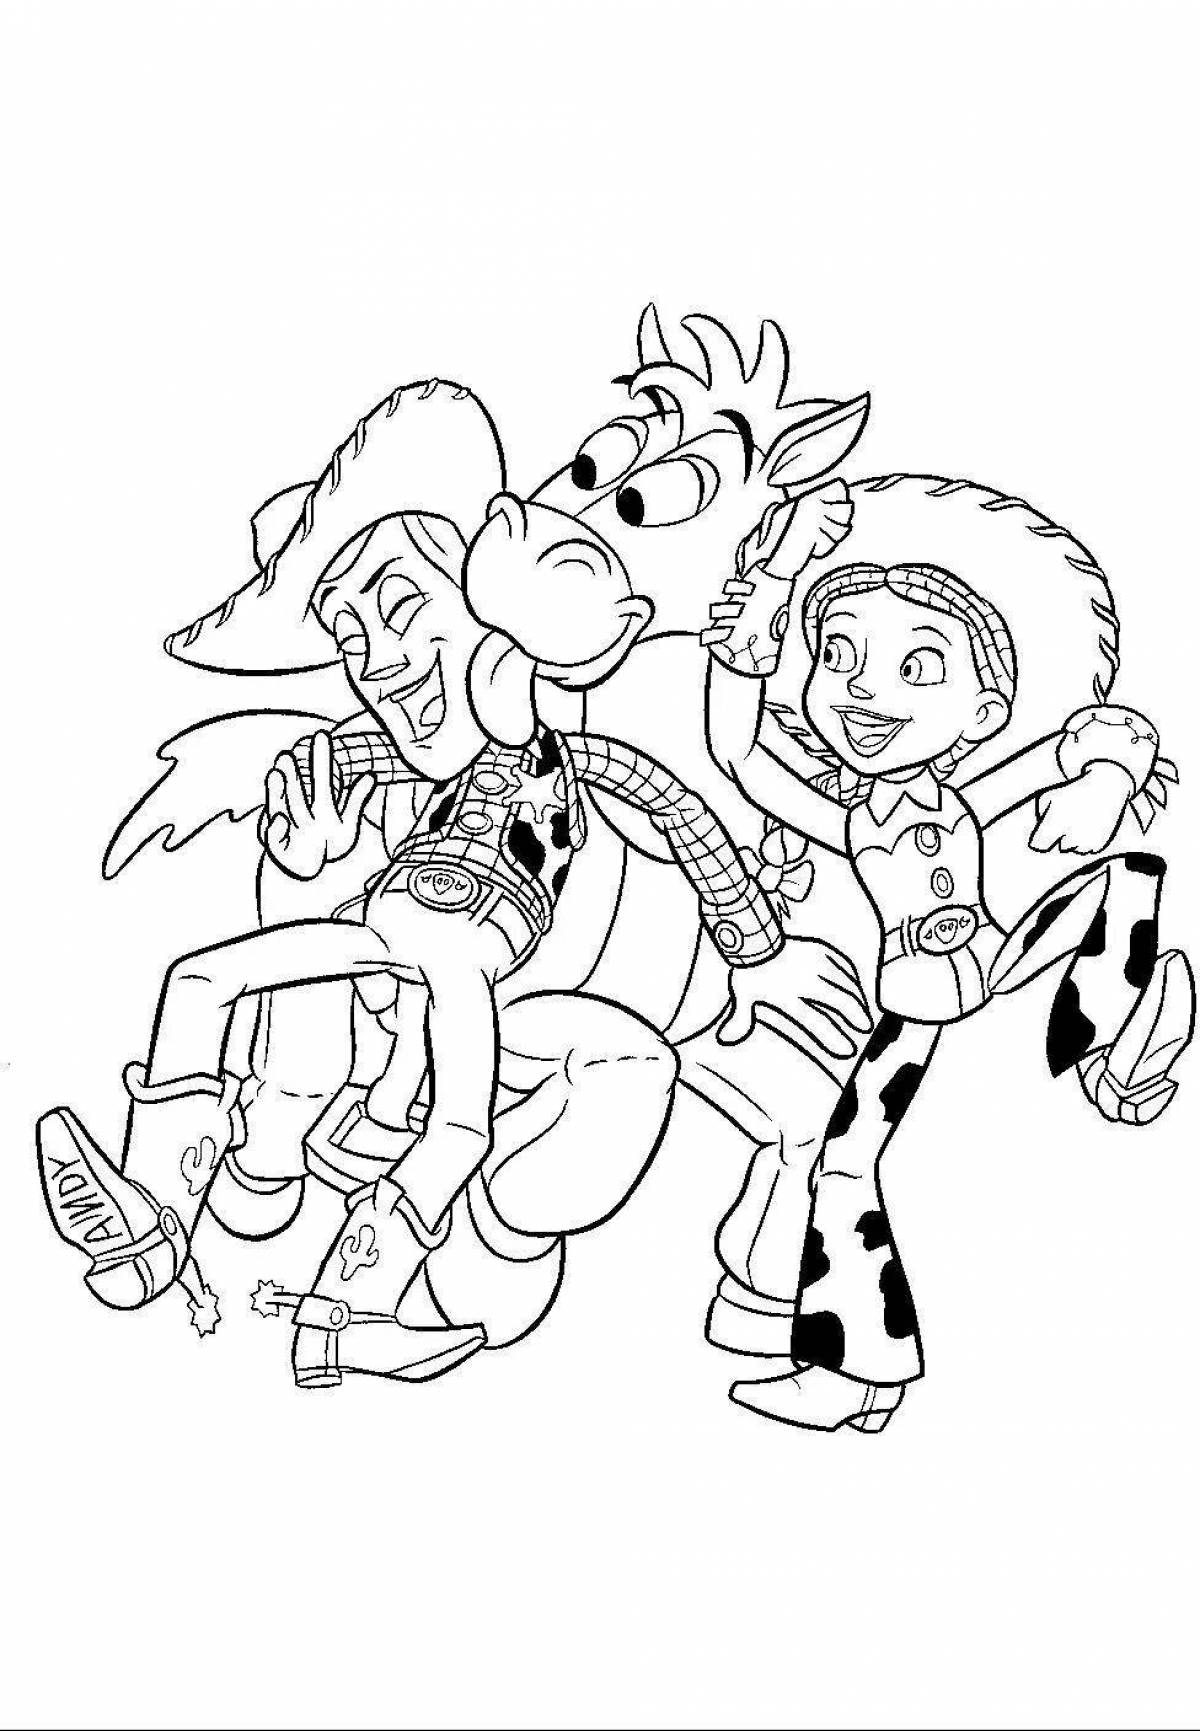 Exciting Jessie Toy Story coloring book